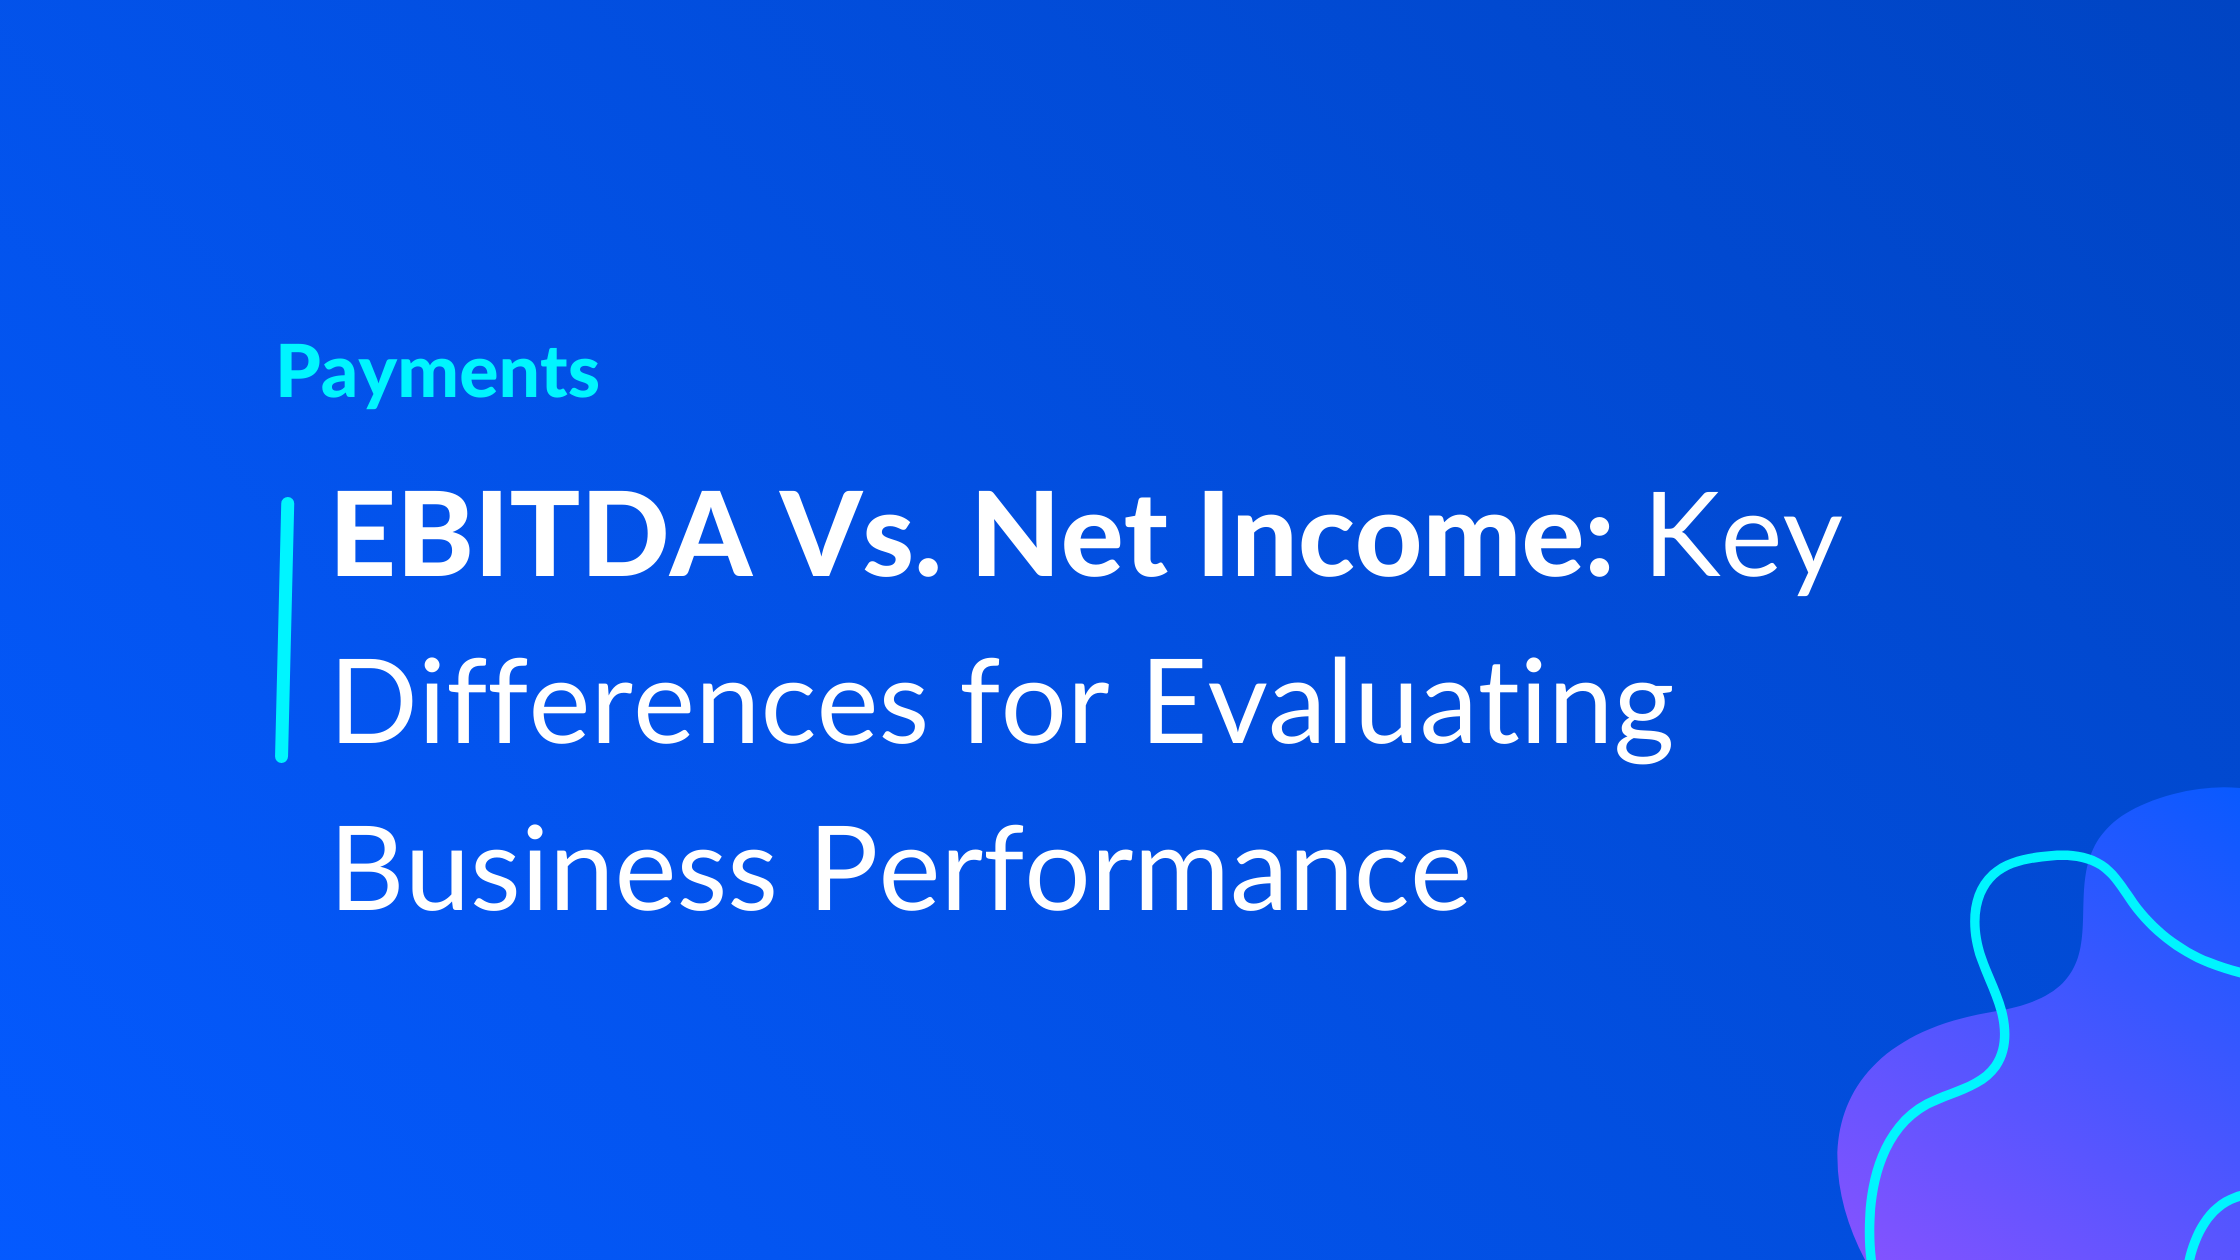 Ebitda Vs Net Income Key Differences For Evaluating Business Performance 0728